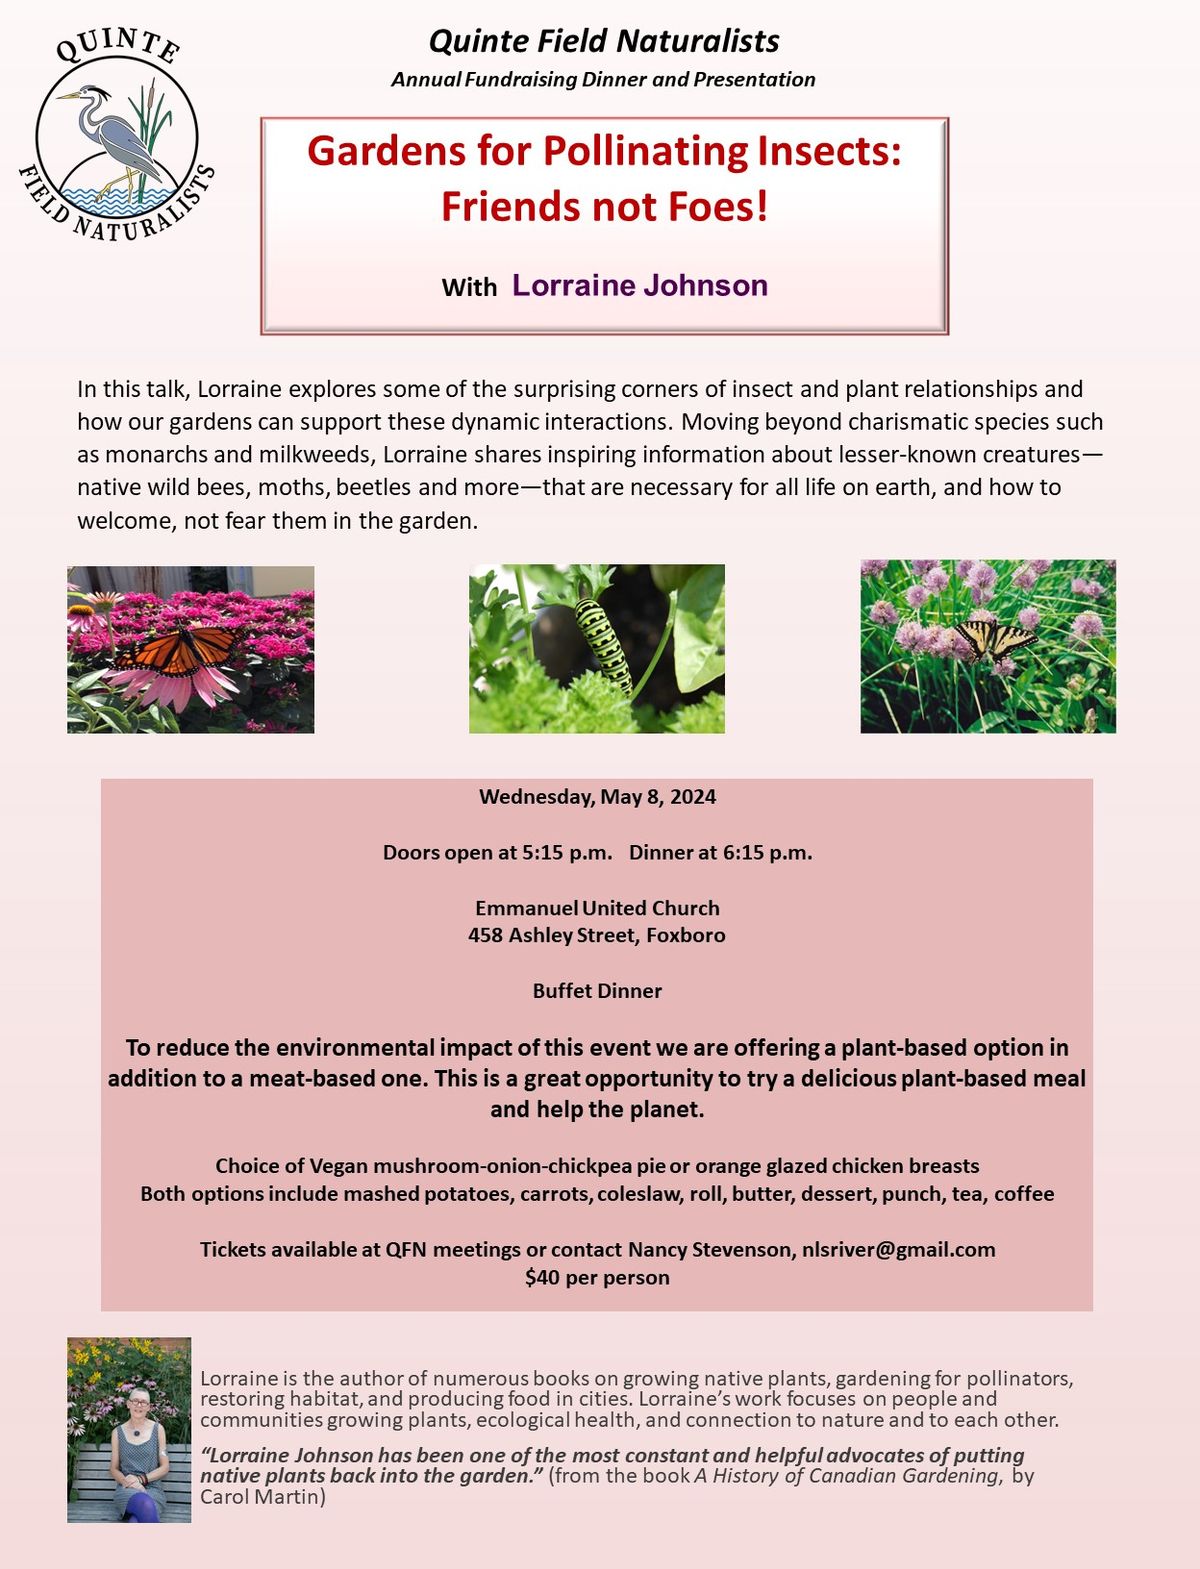 Quinte Field Naturalists Annual Fundraising Dinner and Presentation